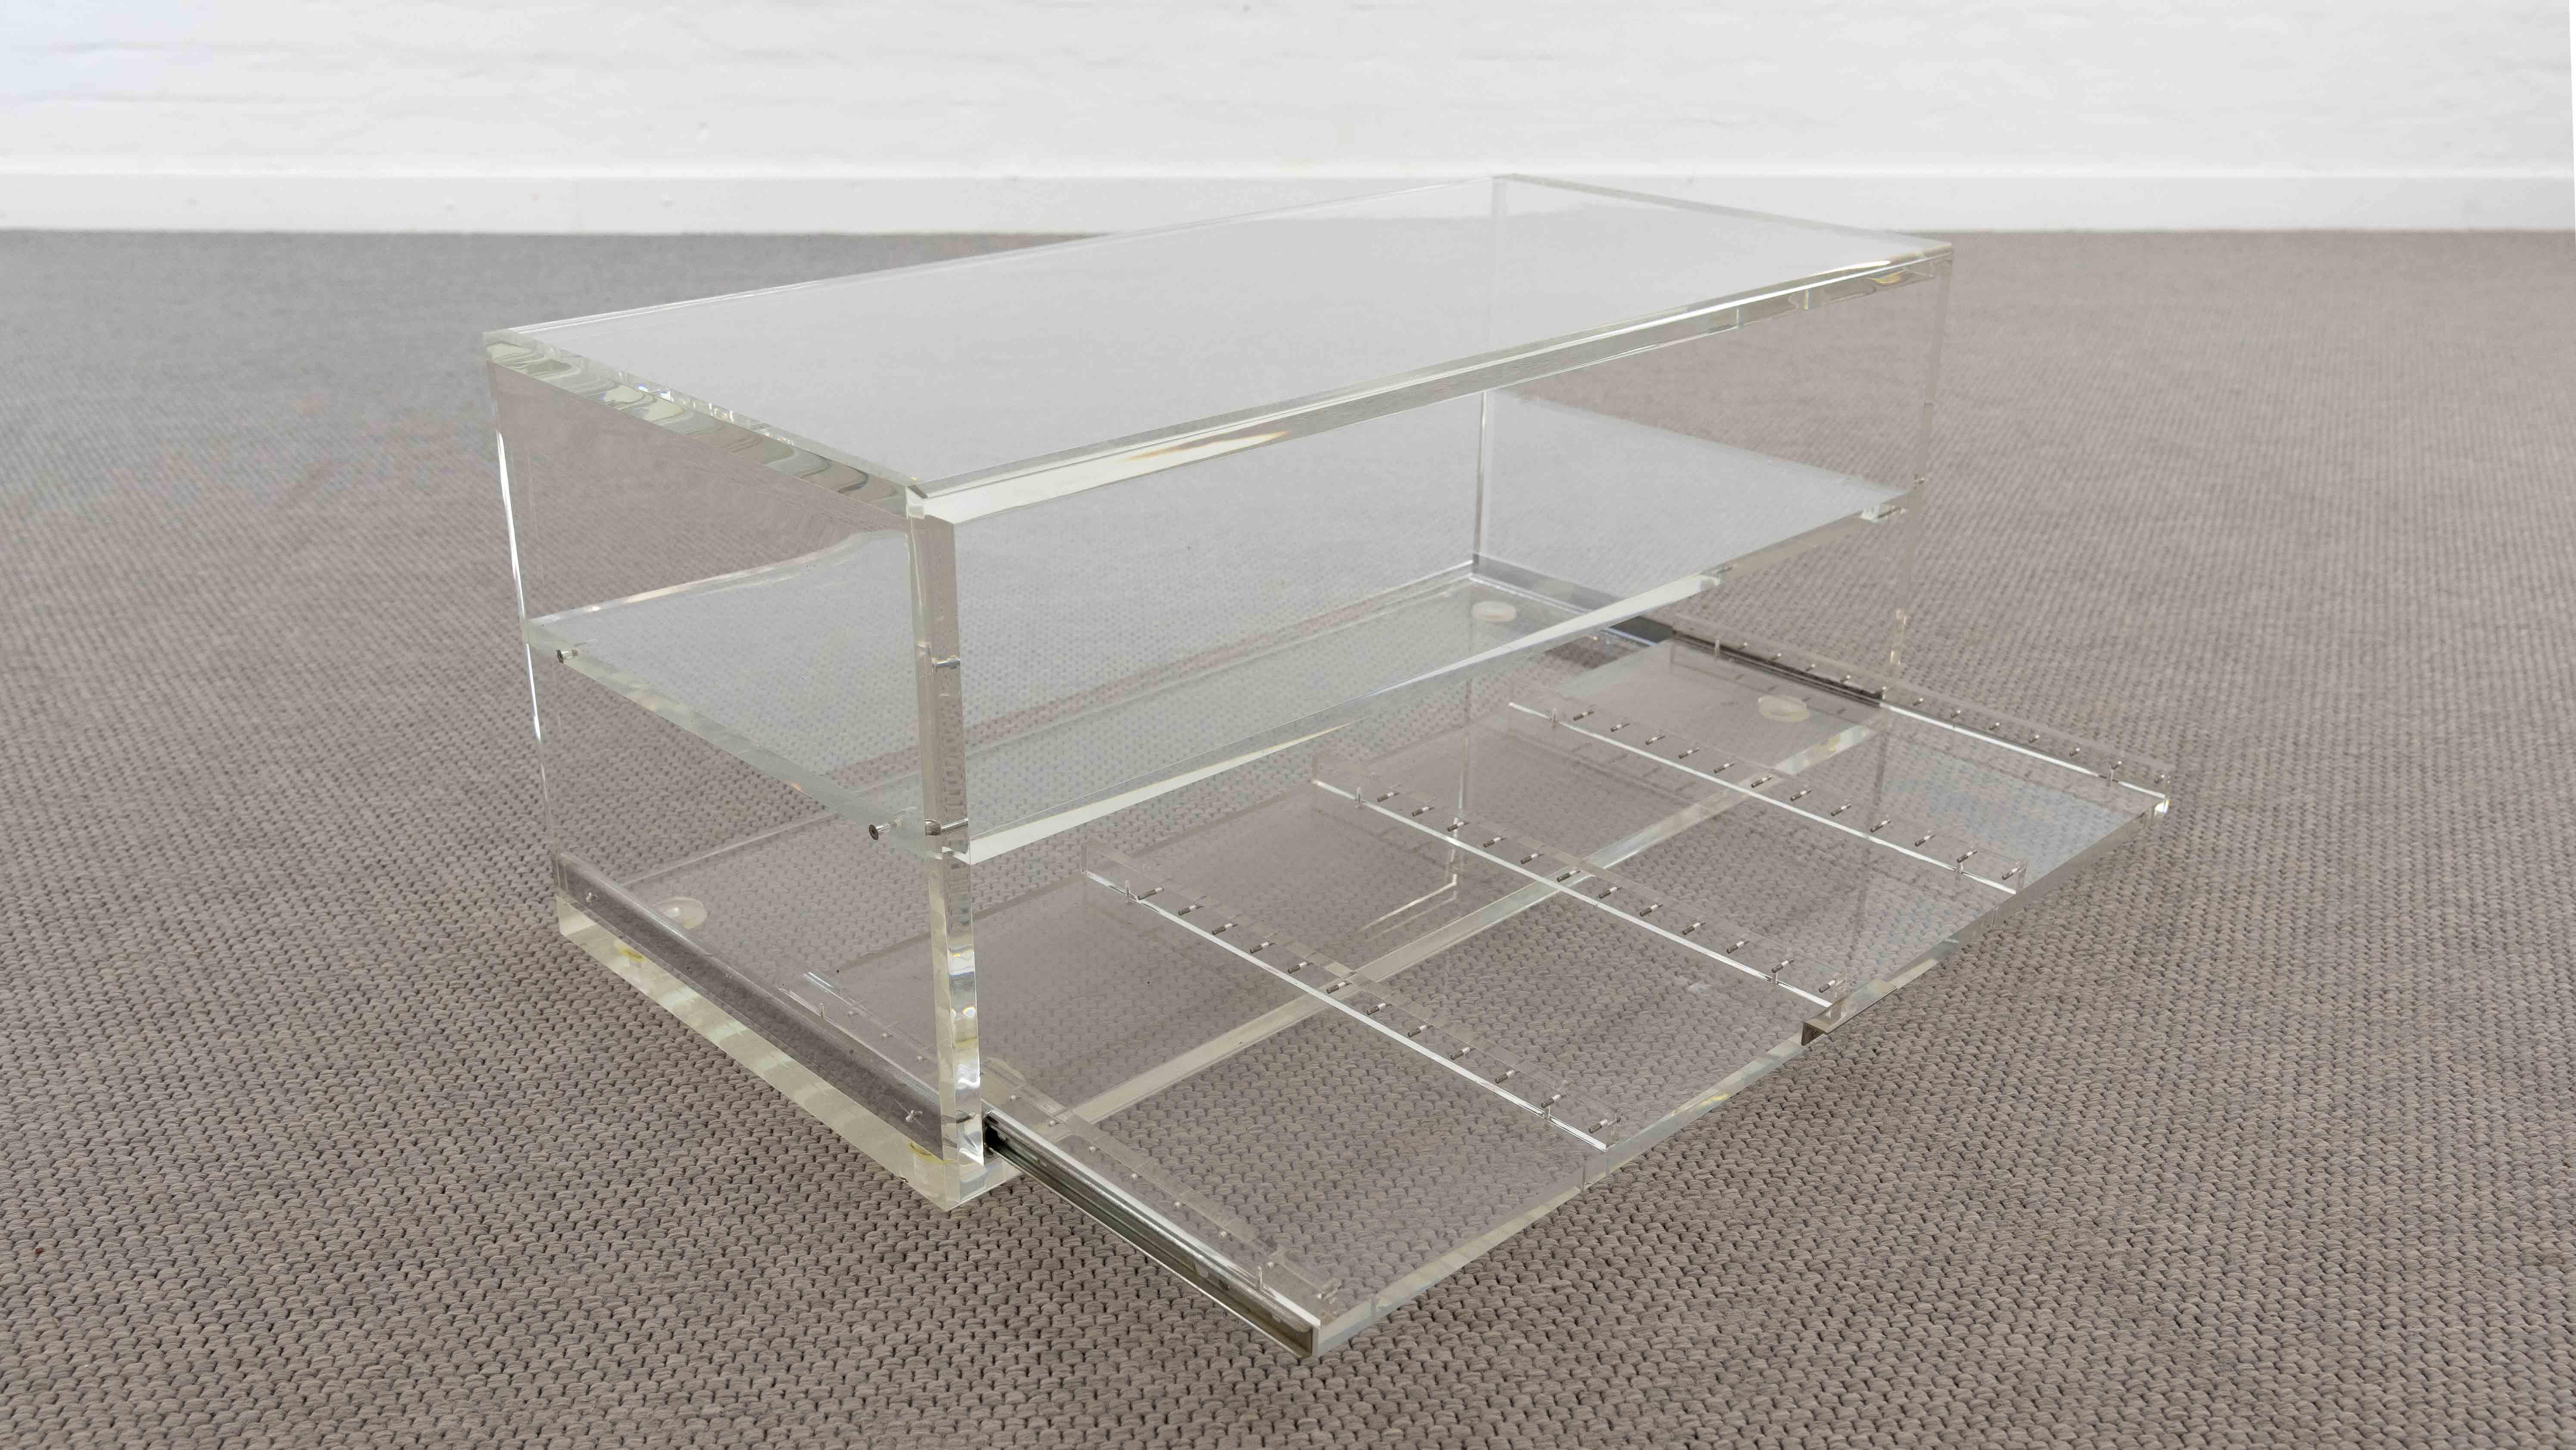 Transparent coffee or sofa table made of Acrylic / Plexiglass. 80s. Designer and Manufacturer unknown. Table with lower drawer to hold your Video Cassette Collection. Weight: 35KG. The Baltenweiler Table Lamp is not part of this offer.